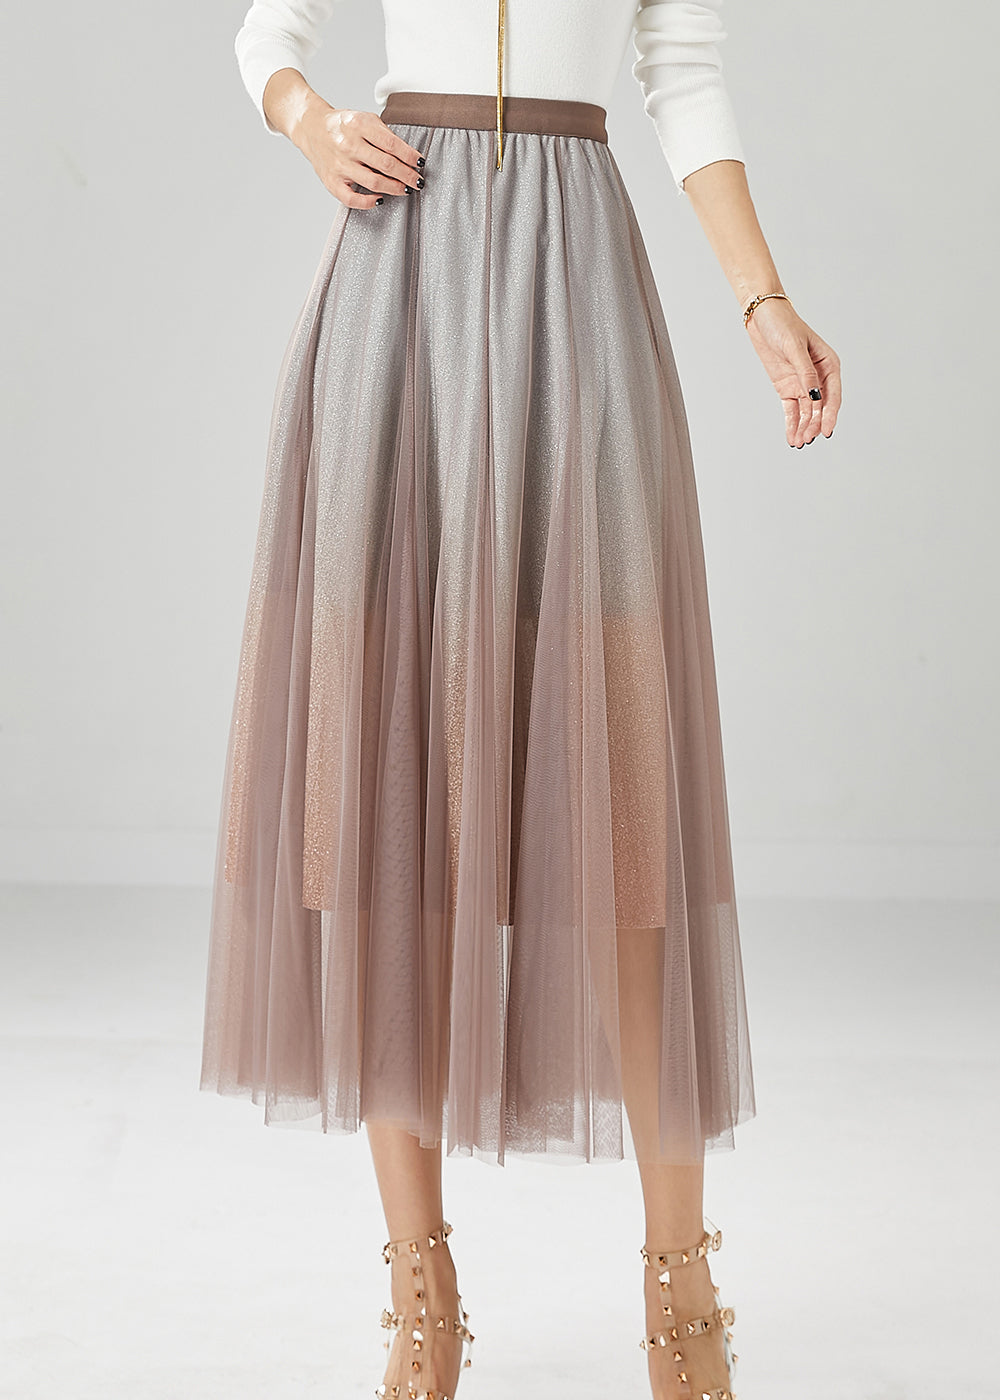 Brick Red Tulle A Line Skirt Gradient Color Summer